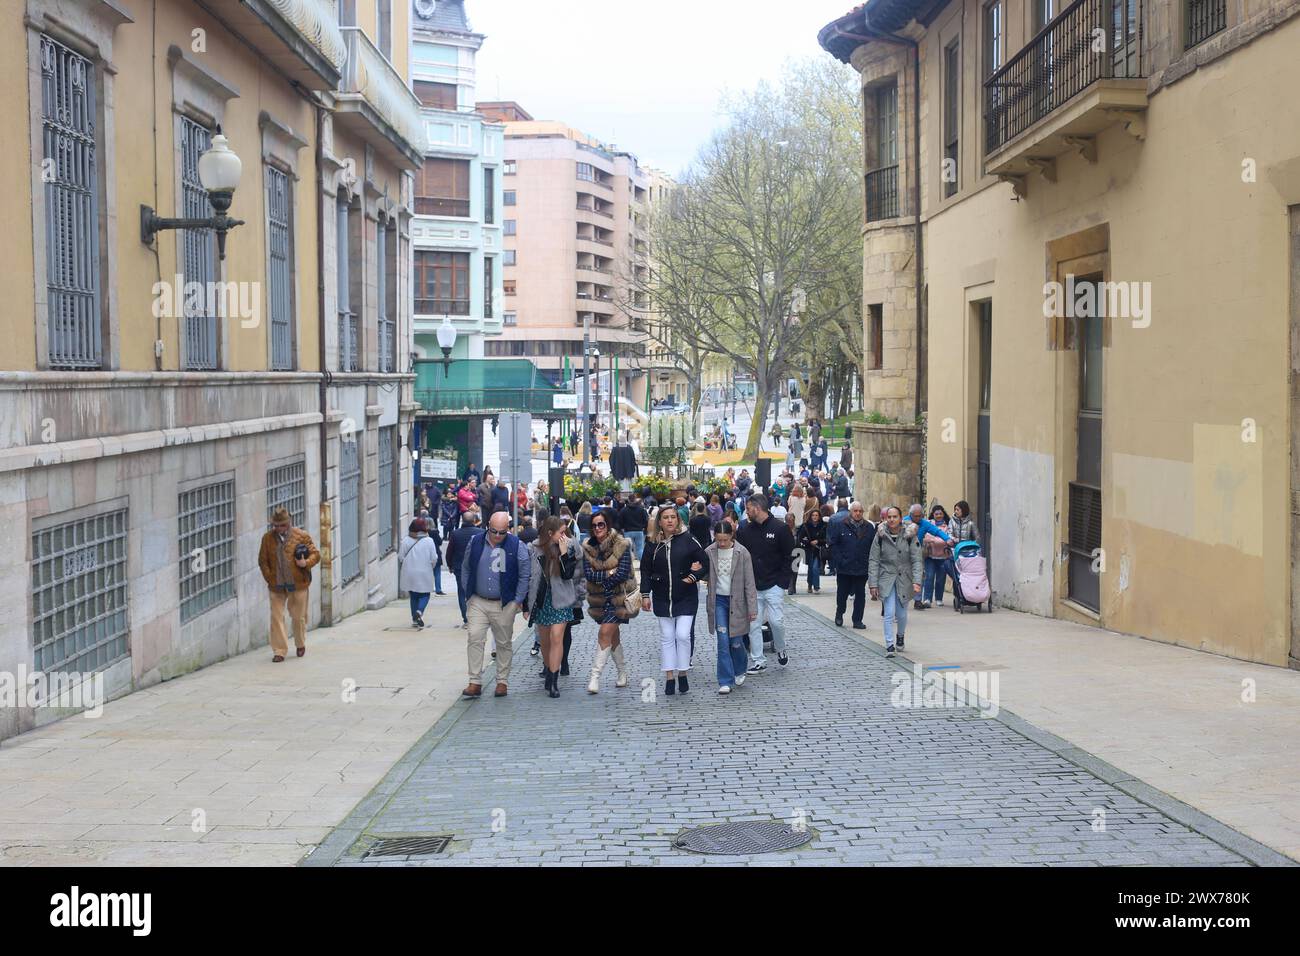 Avilés, Spain, March 28, 2024: The image of the 'Betrayal of Judas' during the Judas Kiss Procession, on March 28, 2024, in Avilés, Spain. Credit: Alberto Brevers / Alamy Live News. Stock Photo